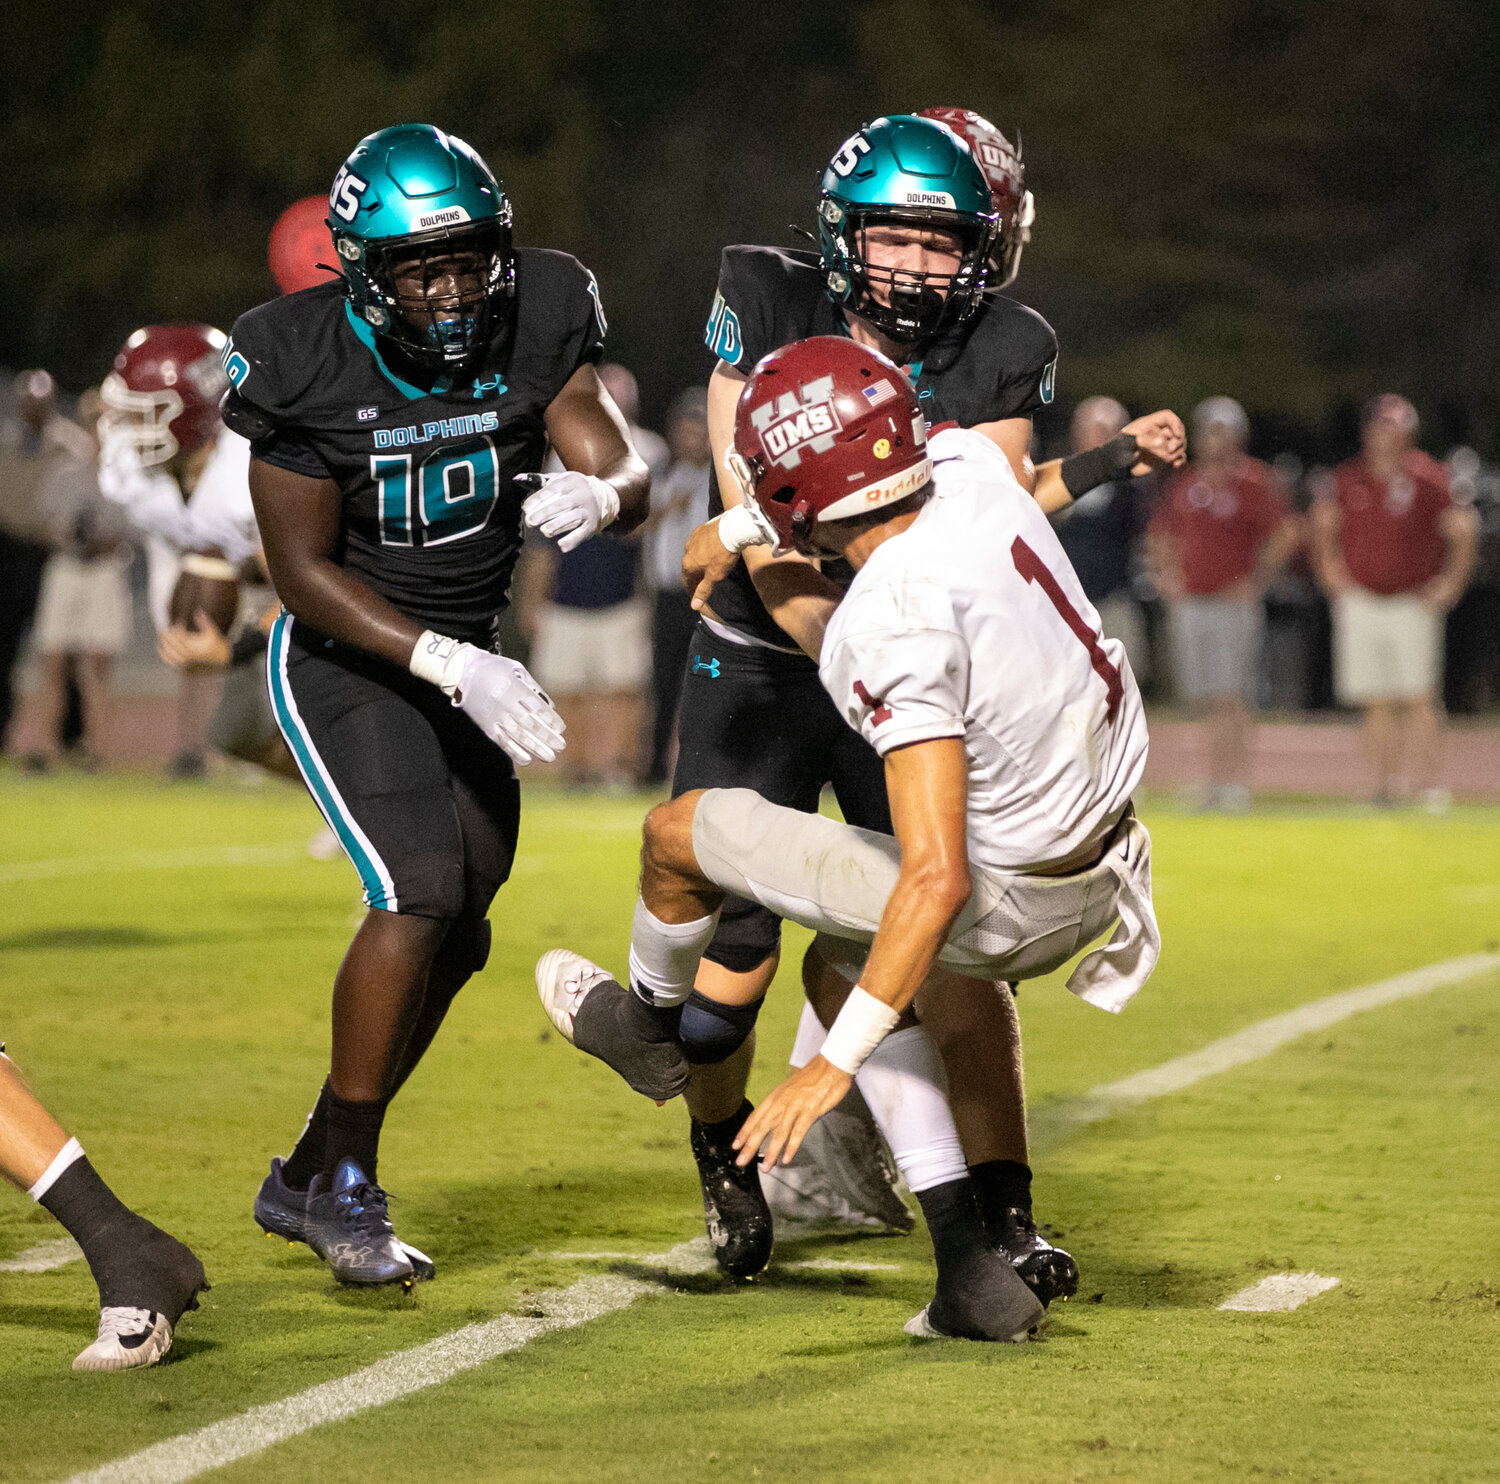 Gulf Shores’ Otto Brewer (40) and Jordan Watson (19) provide pressure on UMS-Wright’s Joe Lott (1) during the first half of Friday’s region battle at the Gulf Shores Sportsplex. The Dolphins’ defensive front dialed up the blitzes all night and earned a 17-0 shutout of the sixth-ranked Bulldogs.